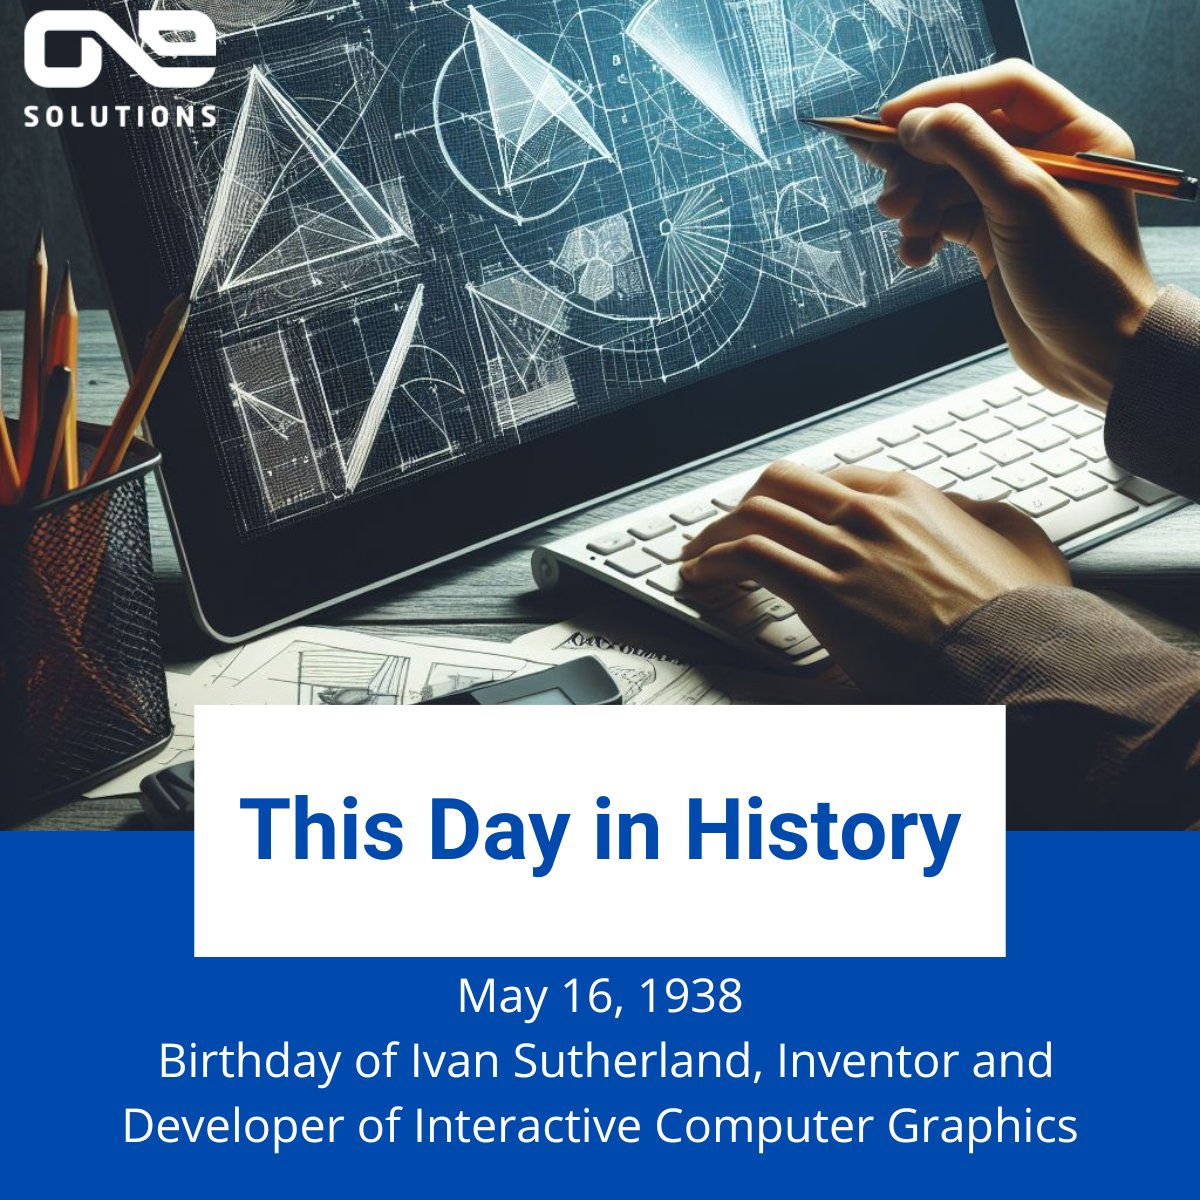 The first graphical user interface, Sketchpad, transformed computer graphics and computer-aided design (CAD). 
#IvanSutherland 👨‍💻 #Sketchpad 🎨 #ComputerGraphics 🖥️ #Innovation 🚀 #TechHistory 📚 #onesolutionsweb #softwaredevelopers